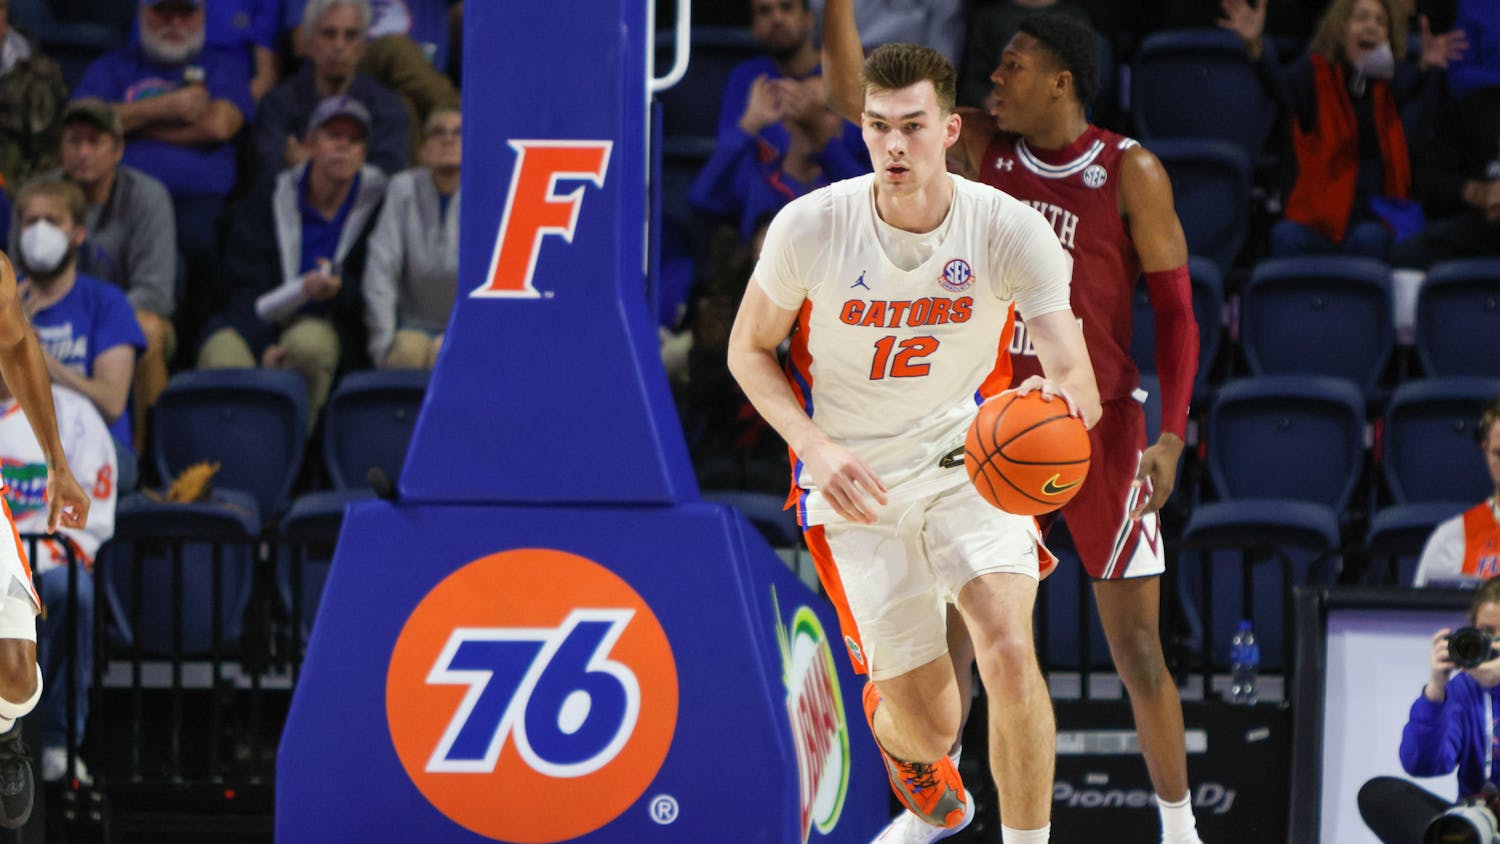 Florida forward Colin Castleton dribbles the ball down the court in the Gators' 81-60 victory against the South Carolina Gamecocks Wednesday, Jan. 25, 2023.